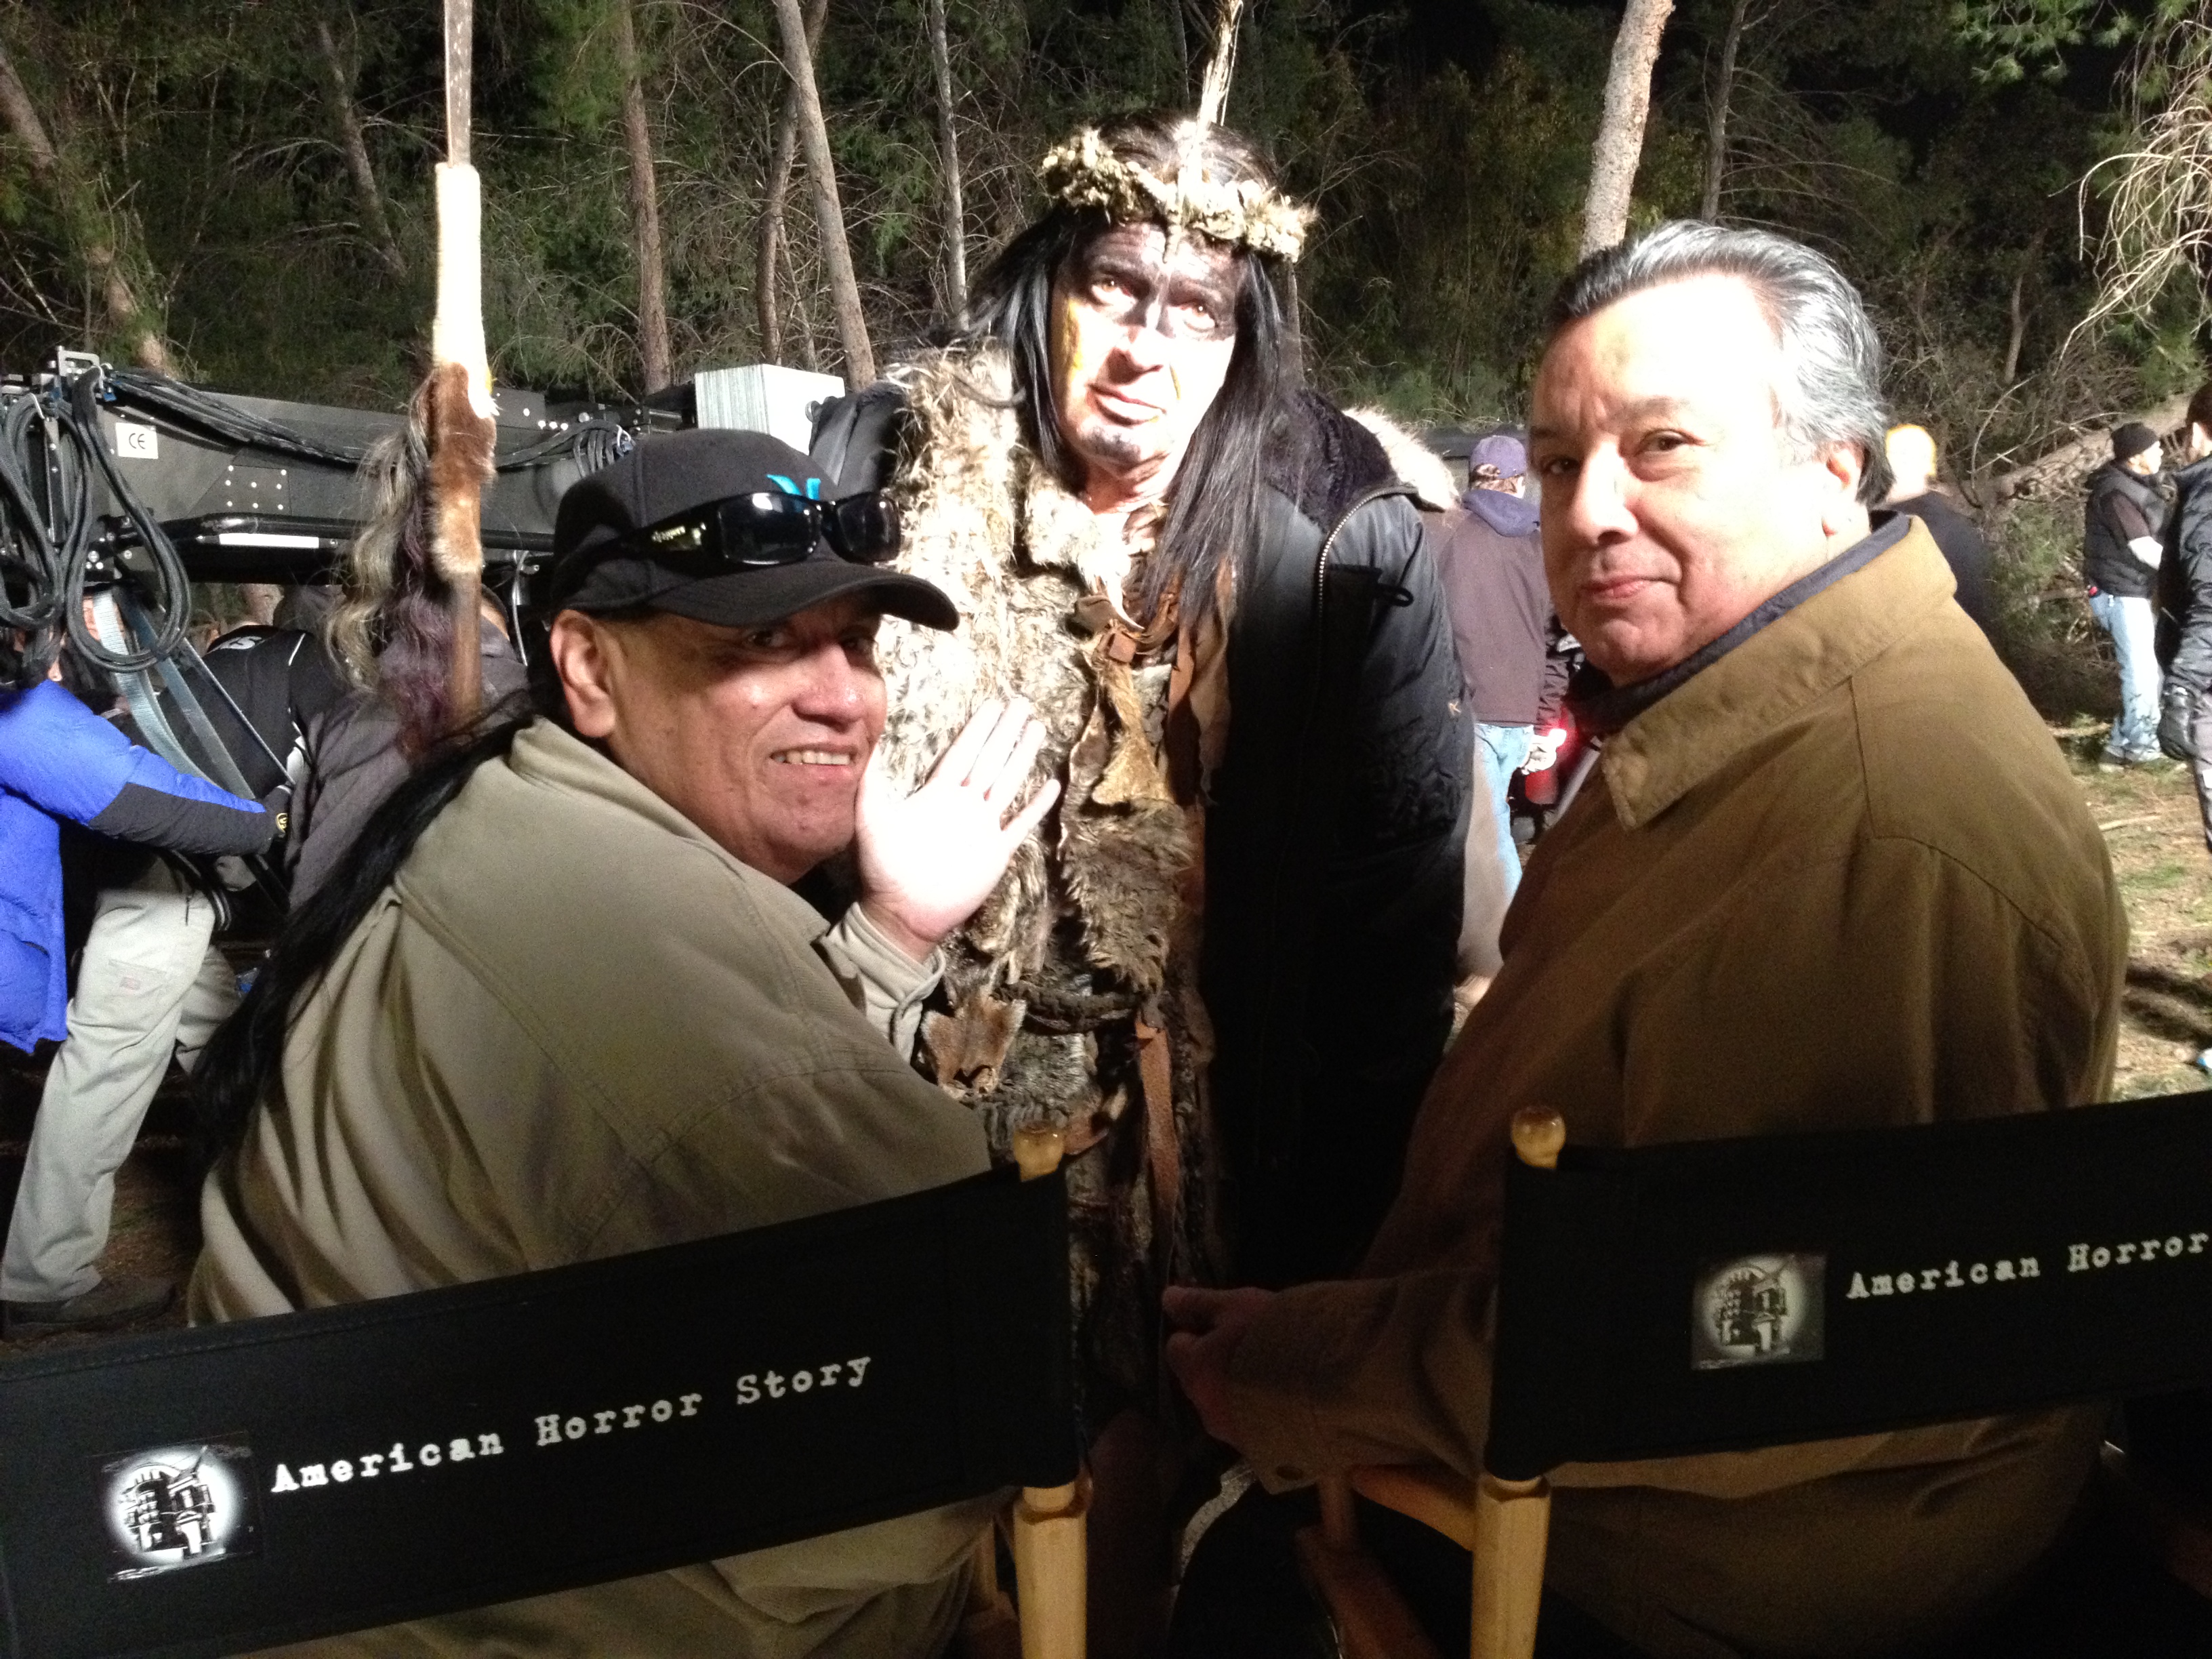 On the set of American Horror Story. Daniel TwoFeathers as Native American Shaman.